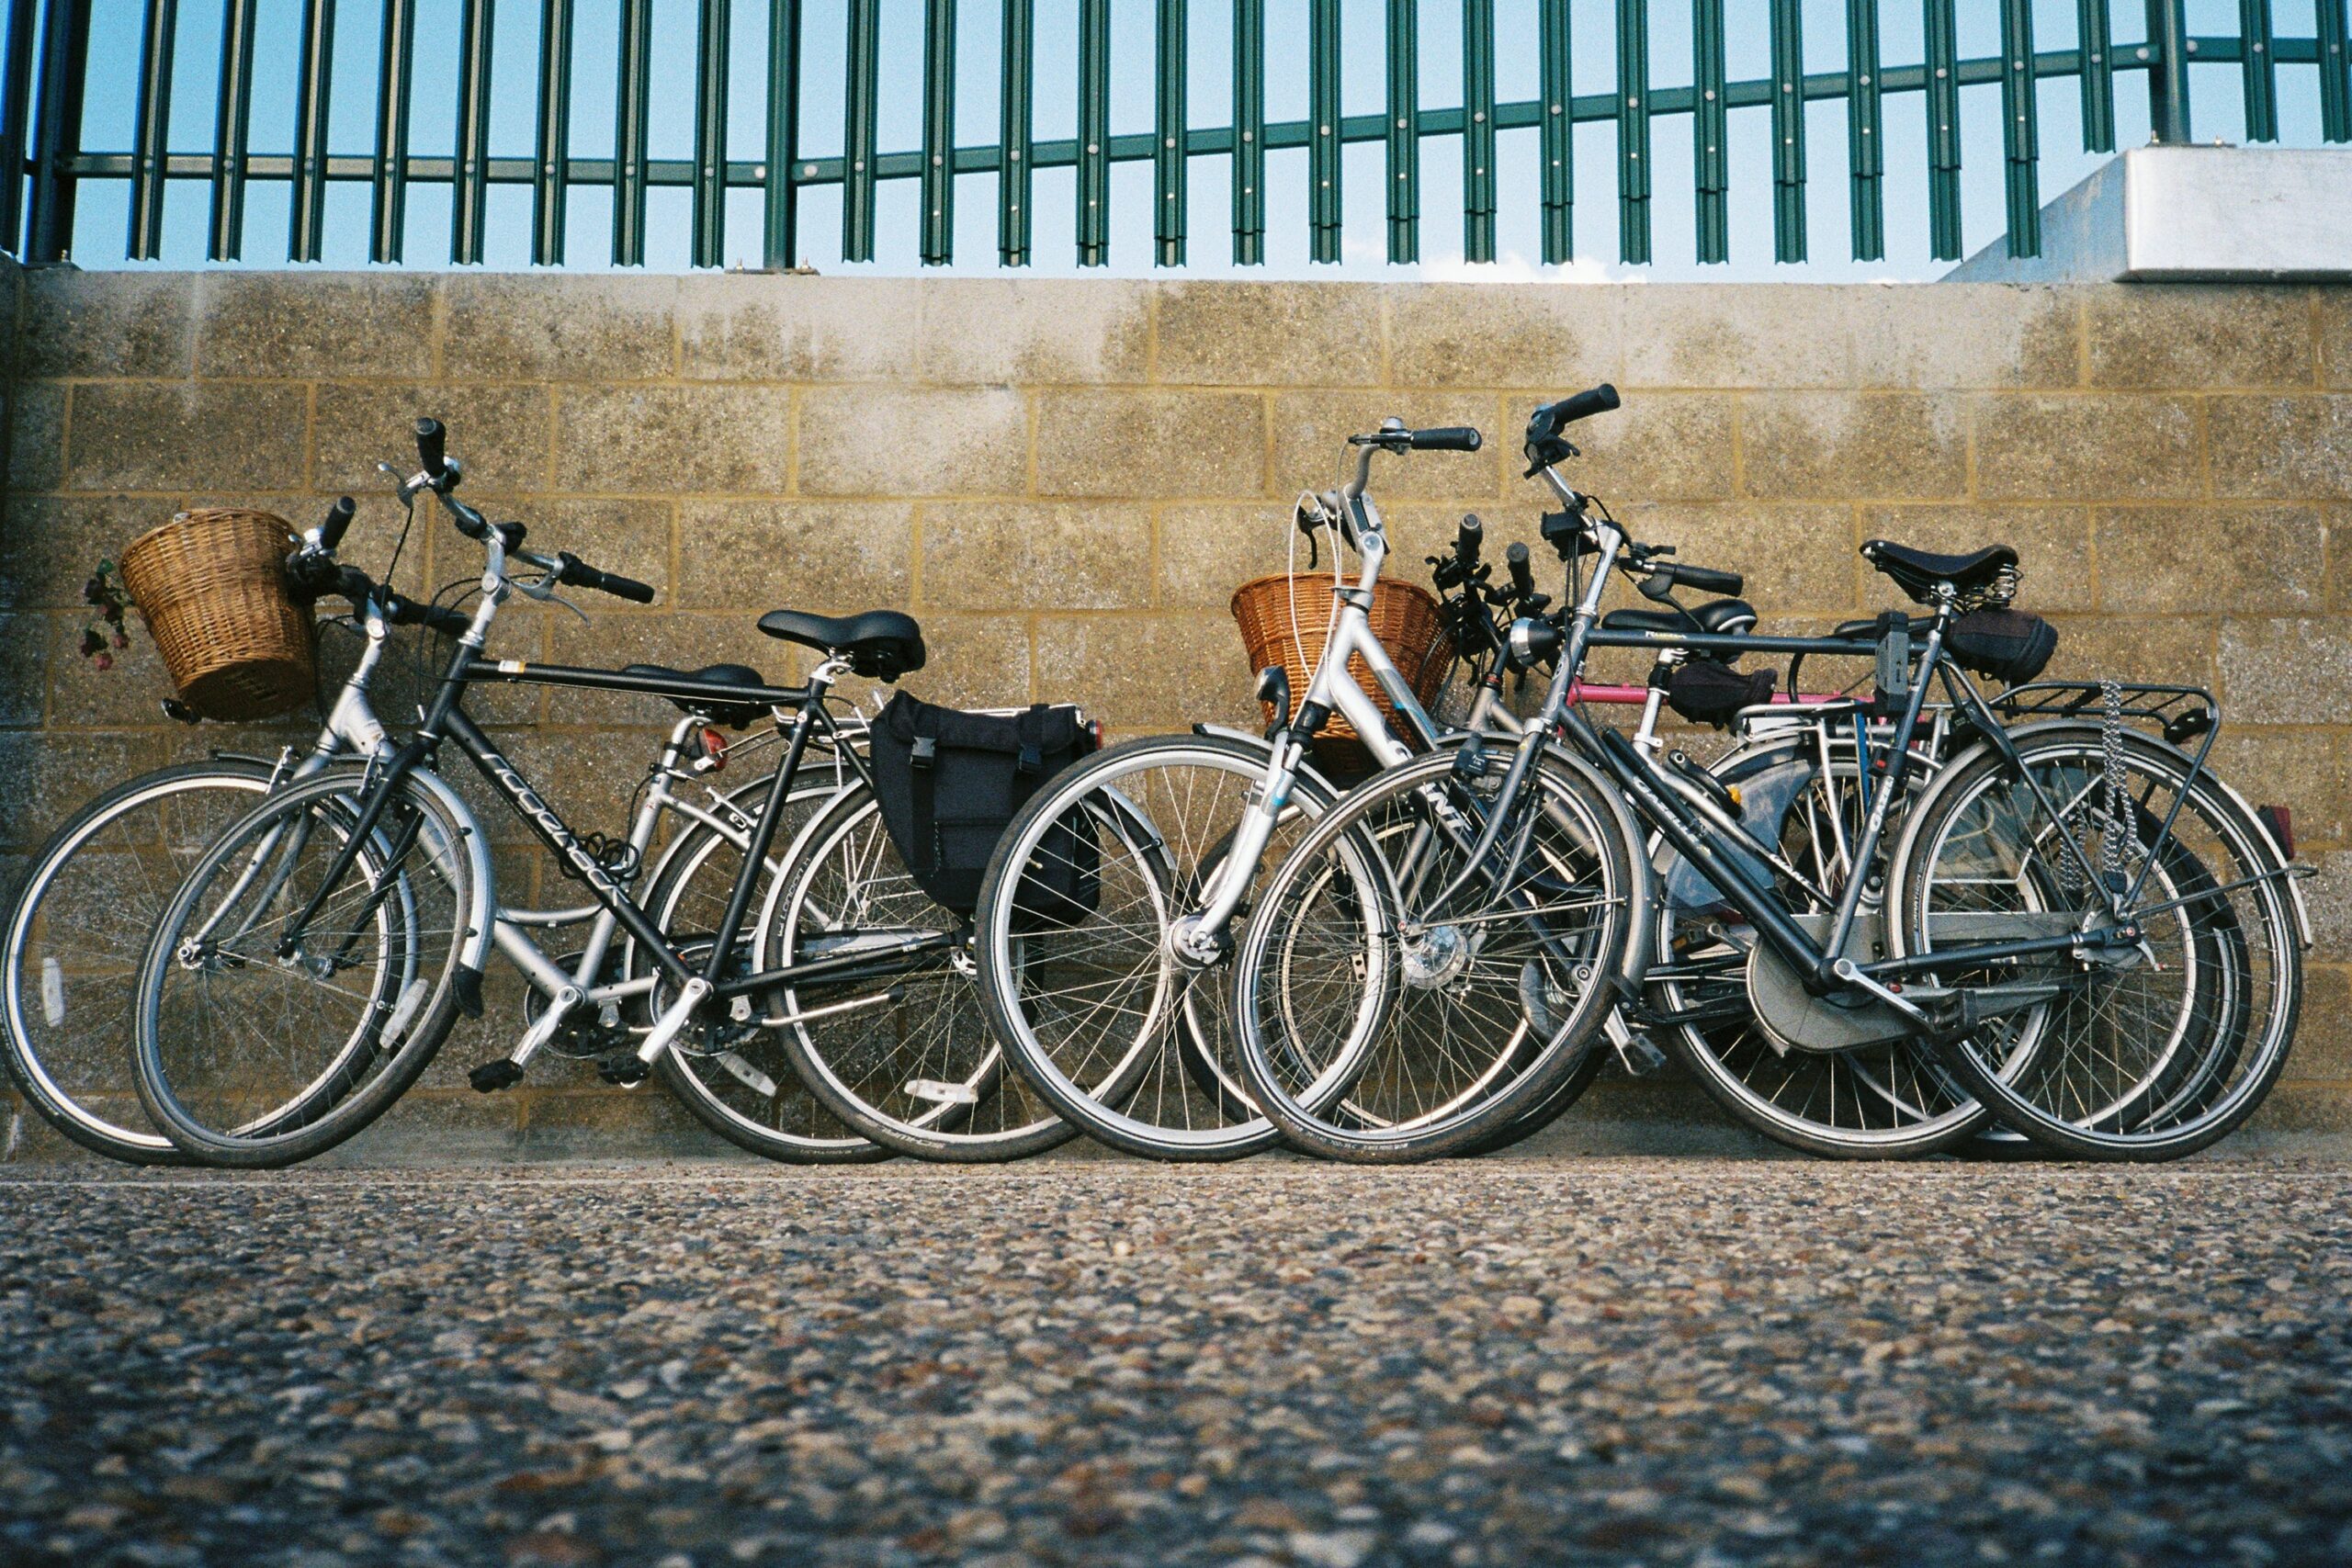 Six bicycles leaning up against a wall